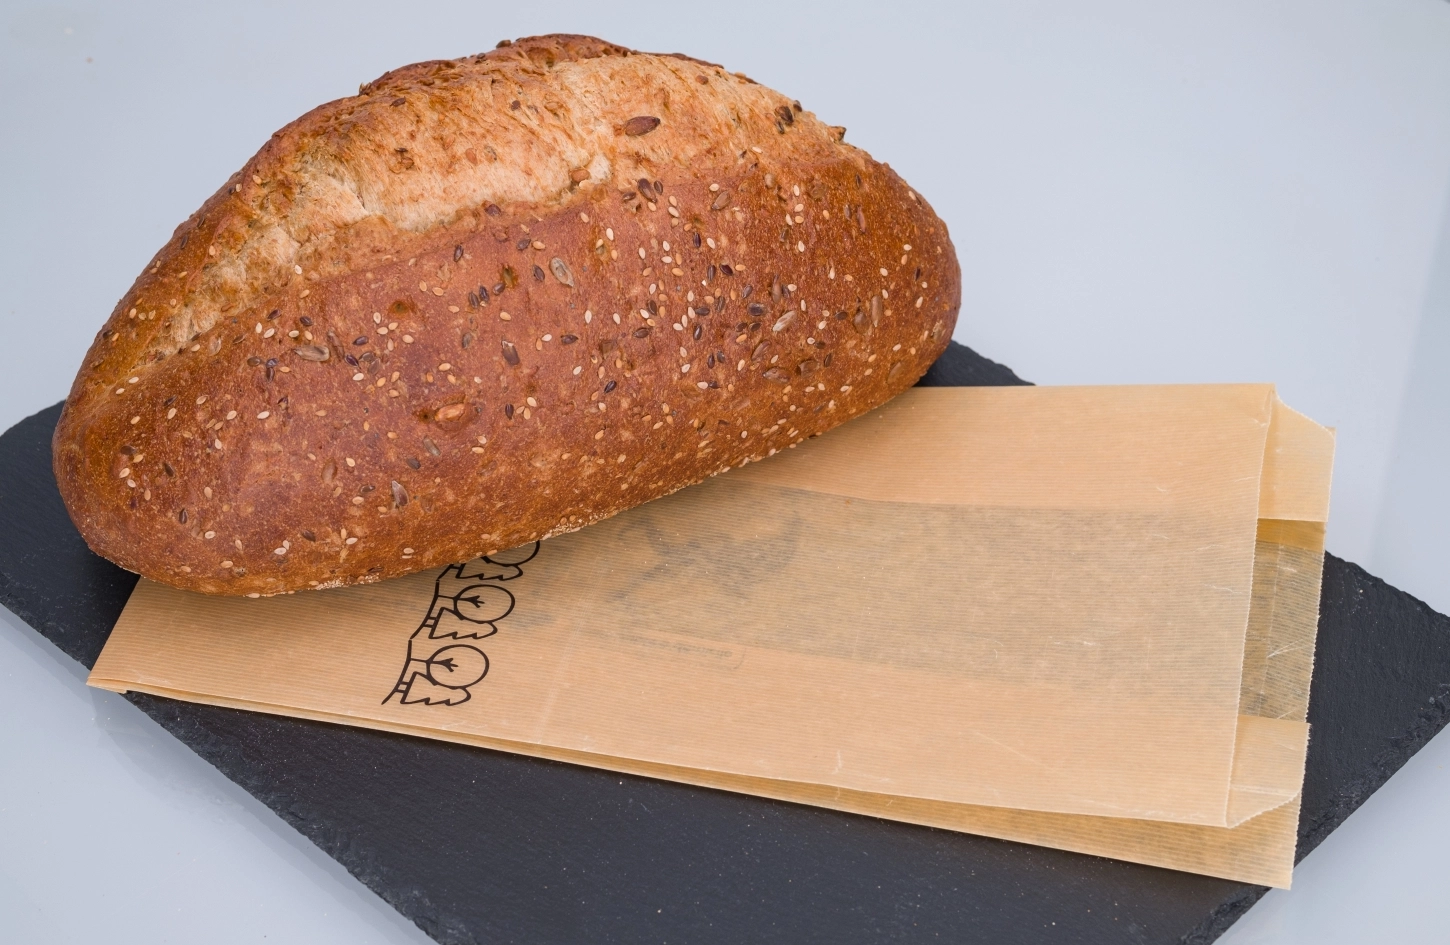 Retail packaging for bread.